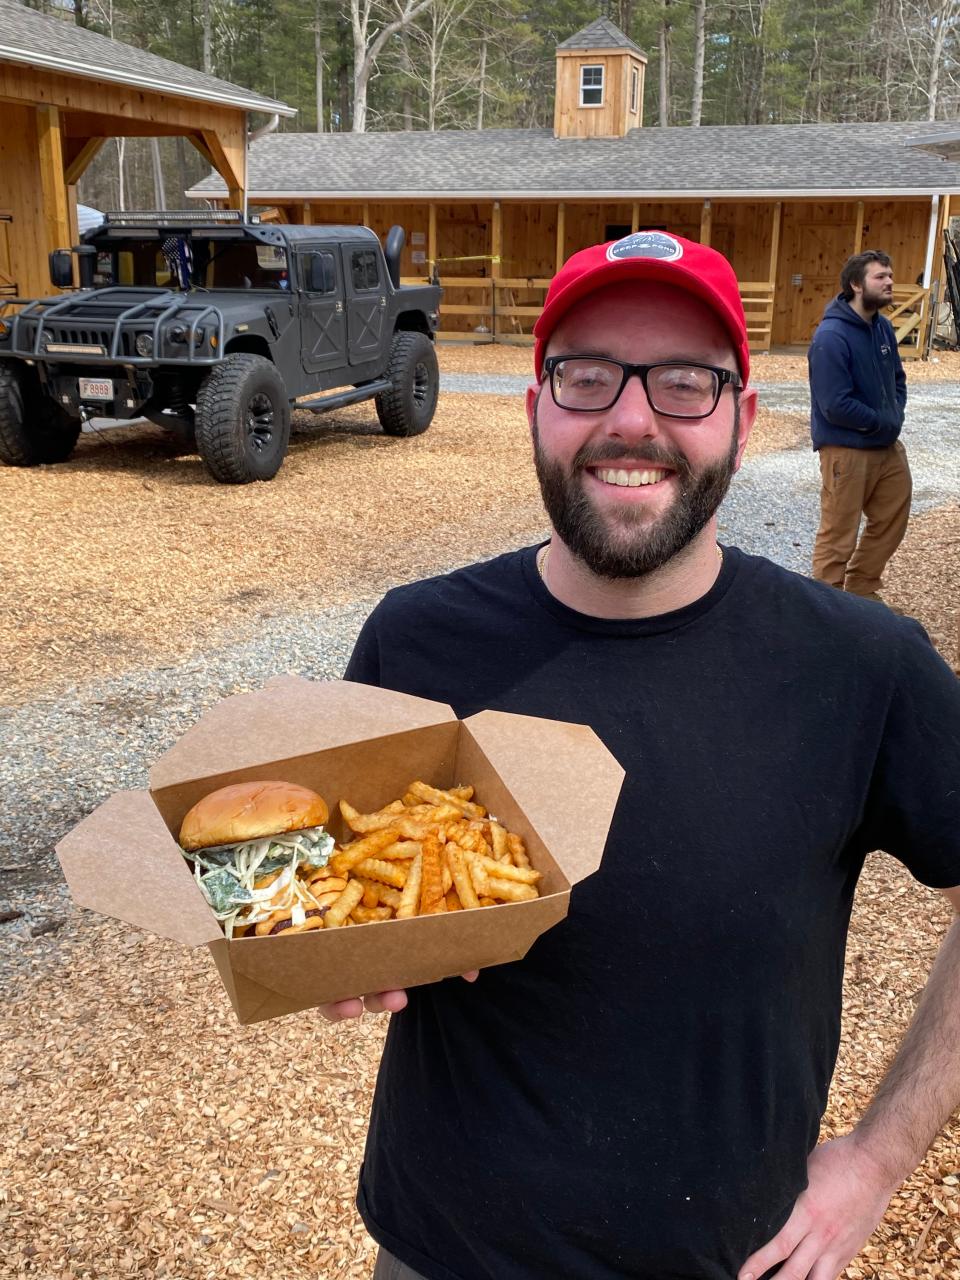 Chef Zach Wirth shows off a freshly made Nashville chicken sandwich with seasoned fries on Friday, March 10, 2023, from Deep Pond Farm's Farmhouse Kitchen food truck.